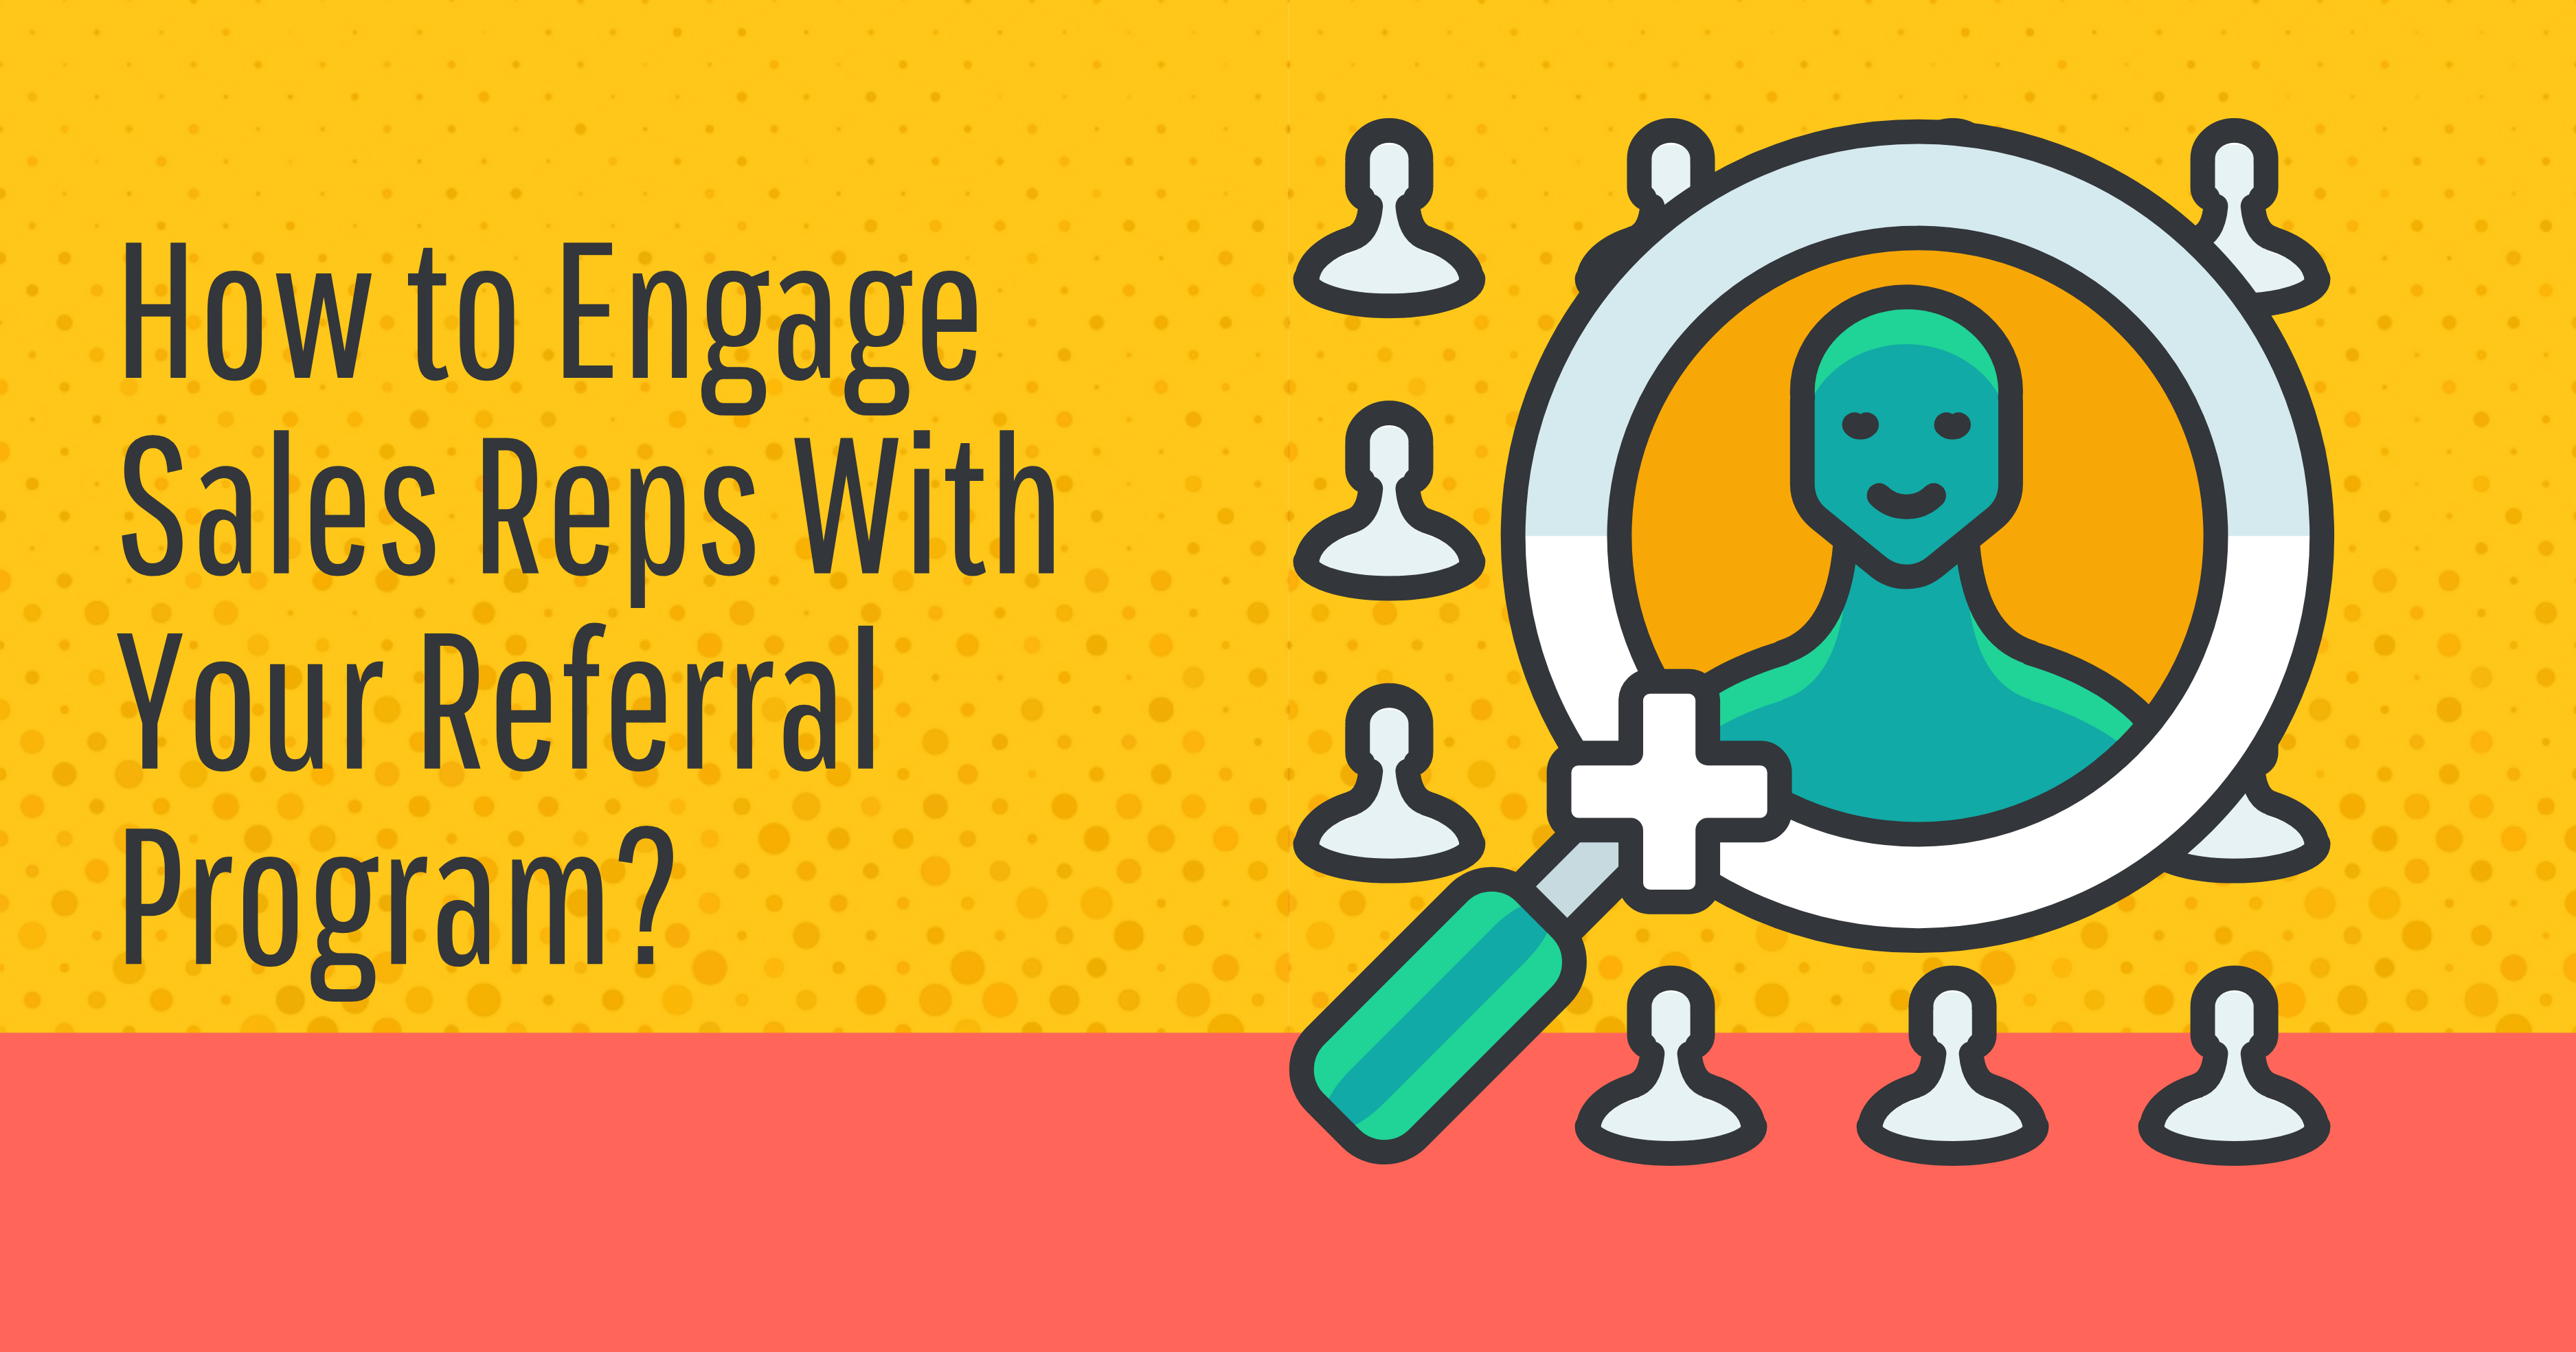 Long Pic_How to Engage Sales Reps With Your Referral Program